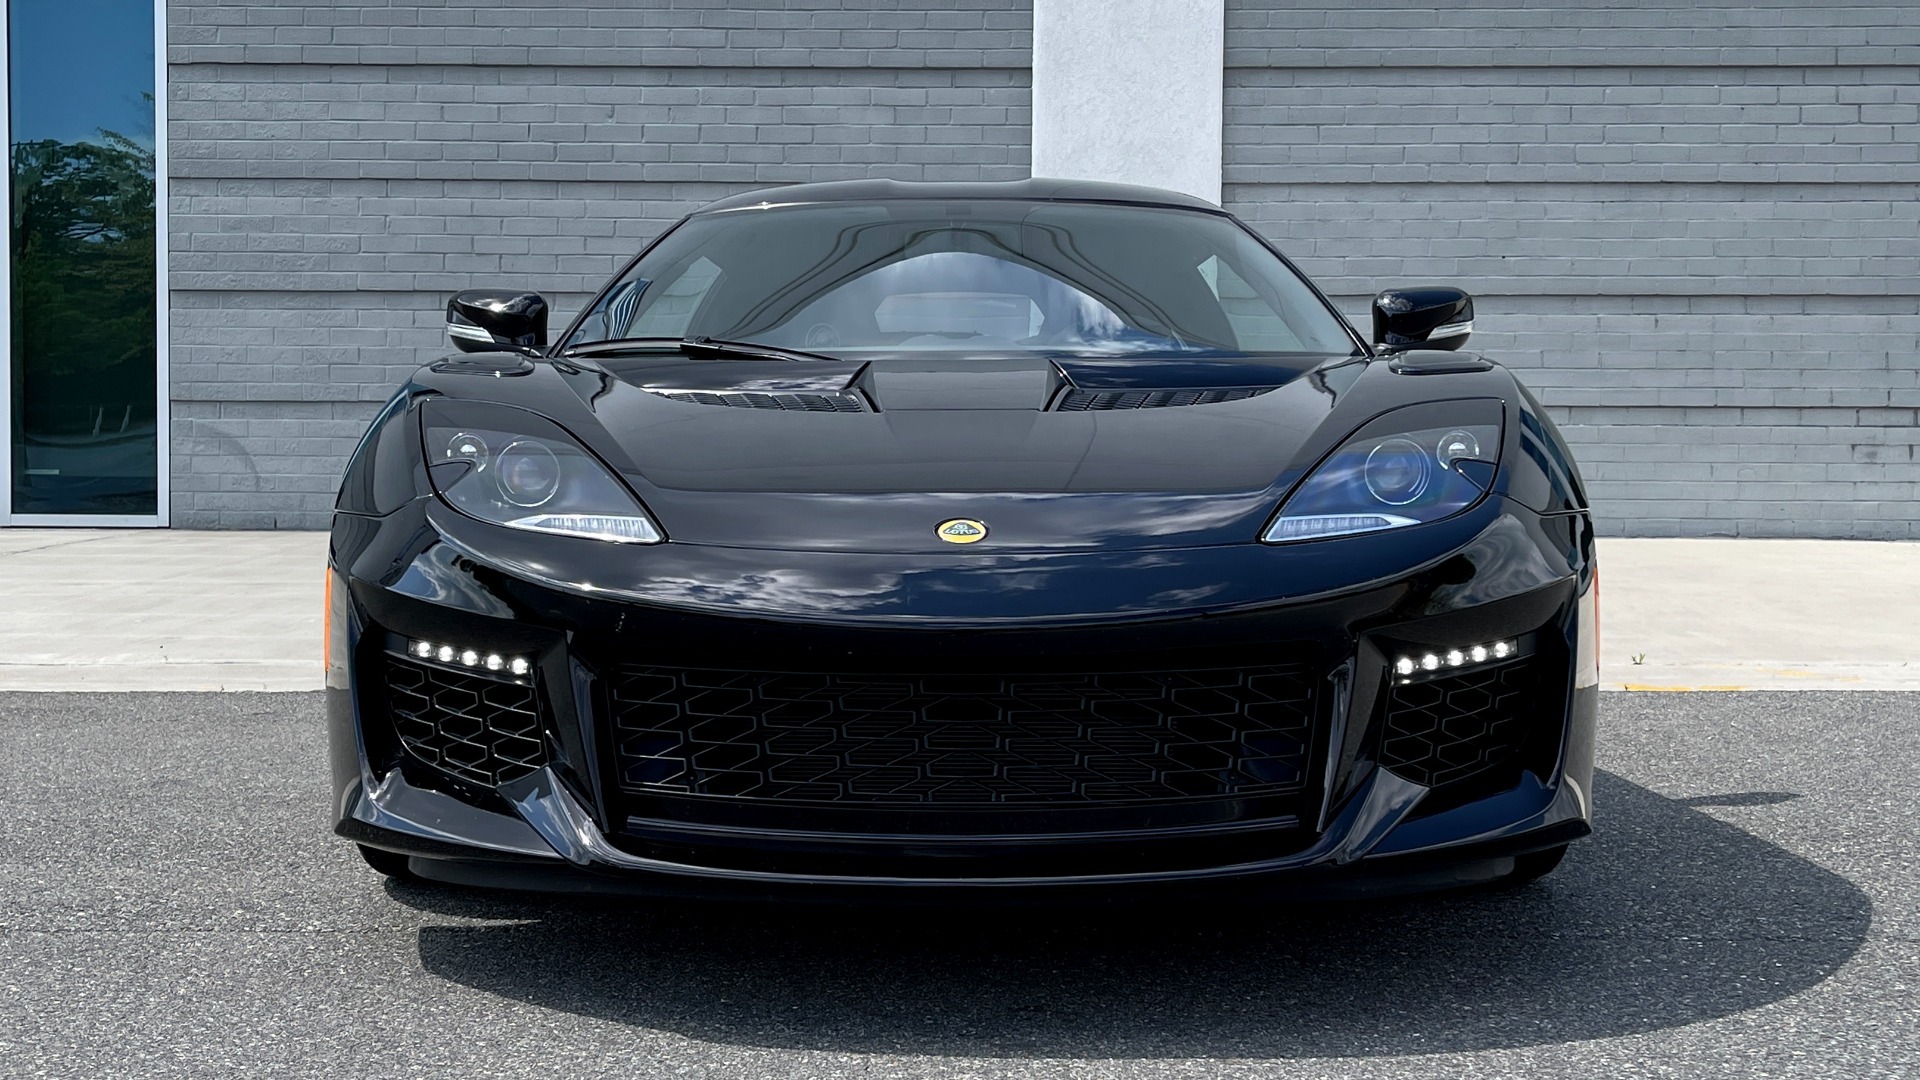 Used 2020 Lotus EVORA GT COUPE / 3.5L SC / NAV / ALPINE SND W/SUBWOOFER / REARVIEW for sale $102,895 at Formula Imports in Charlotte NC 28227 6